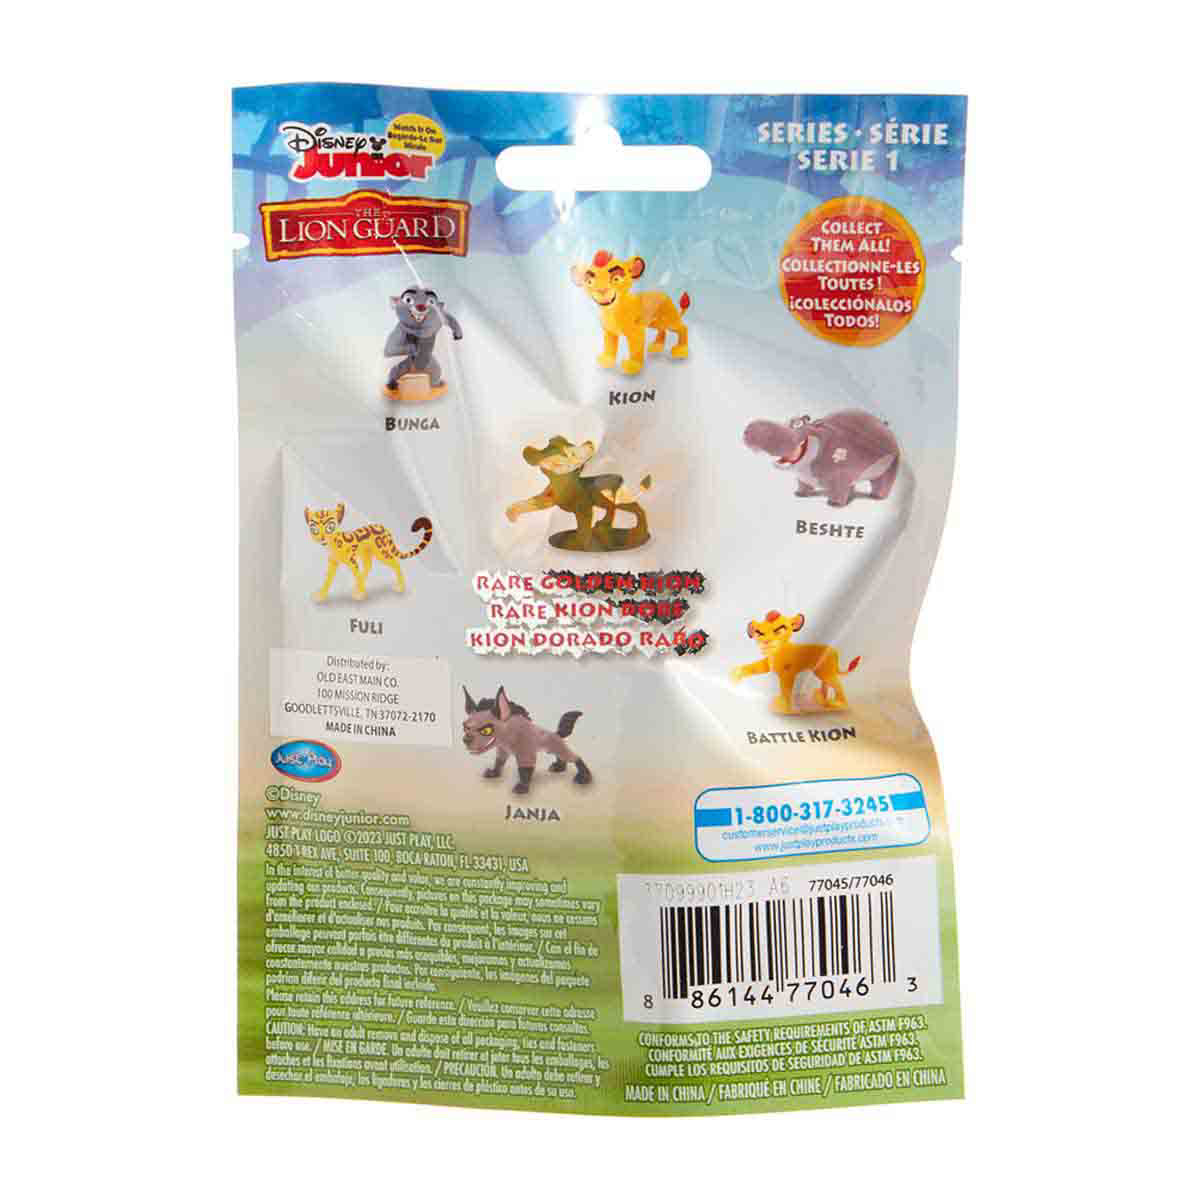 The Lion Guard Blind Bags